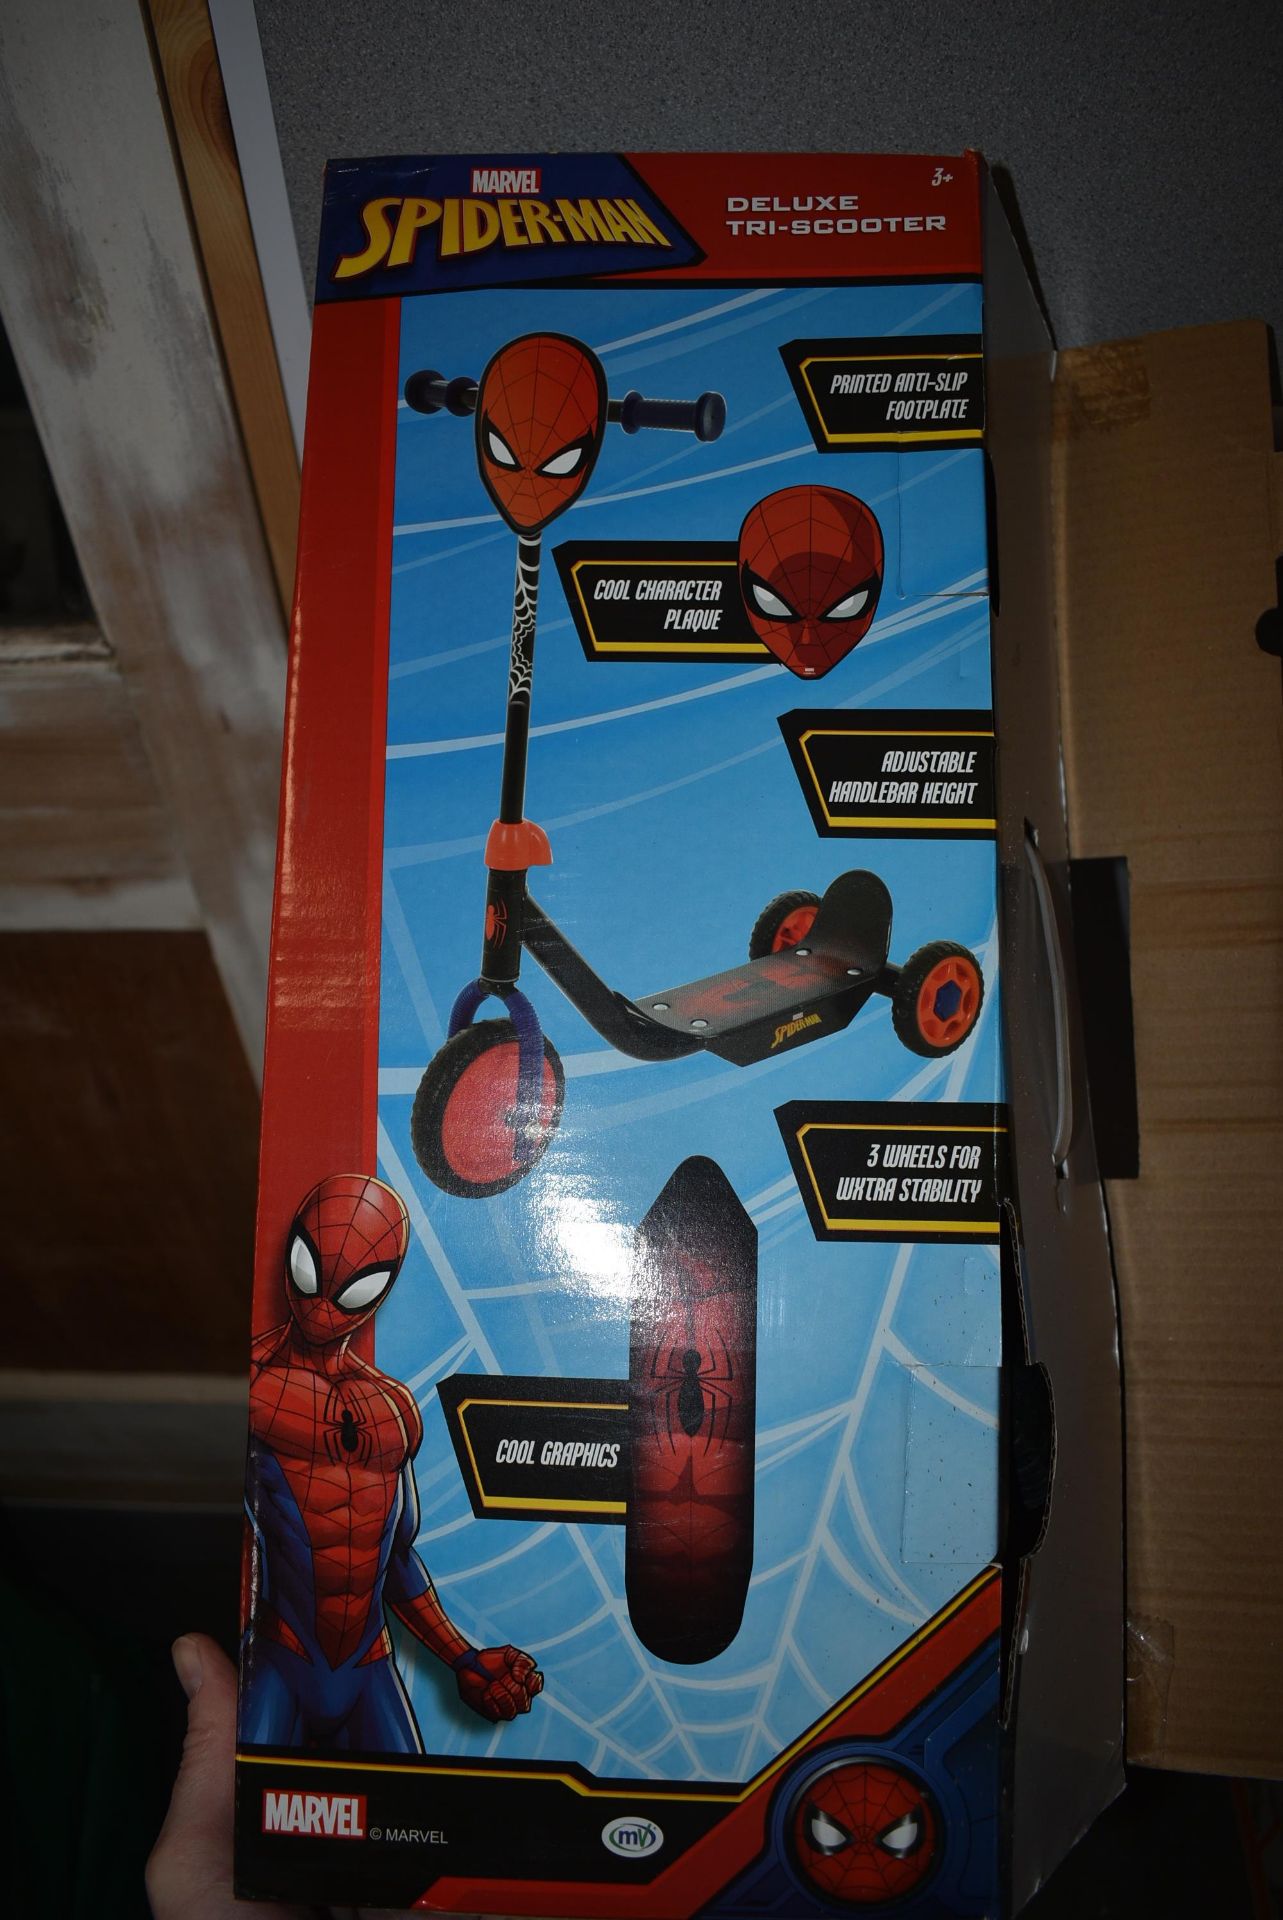 Spiderman Tri-Scooter - Image 4 of 4